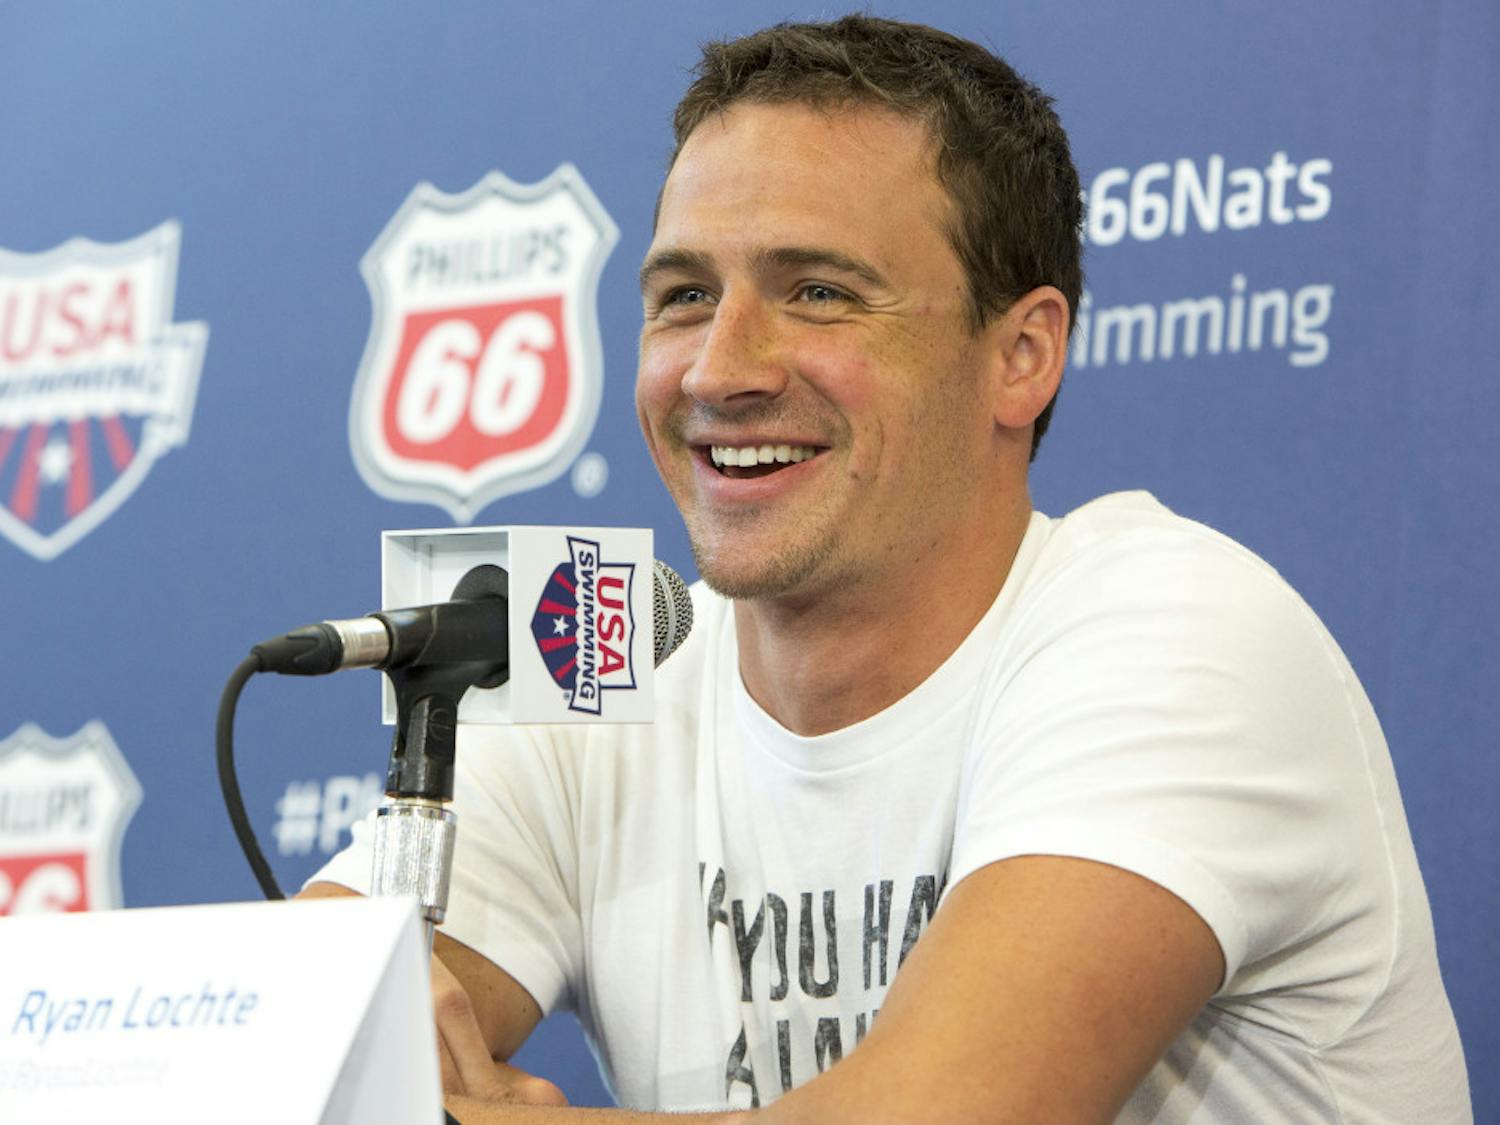 Olympic gold medalist Ryan Lochte smiles as he takes questions from the media at the U.S. swimming nationals news conference in Irvine, Calif., on Tuesday.